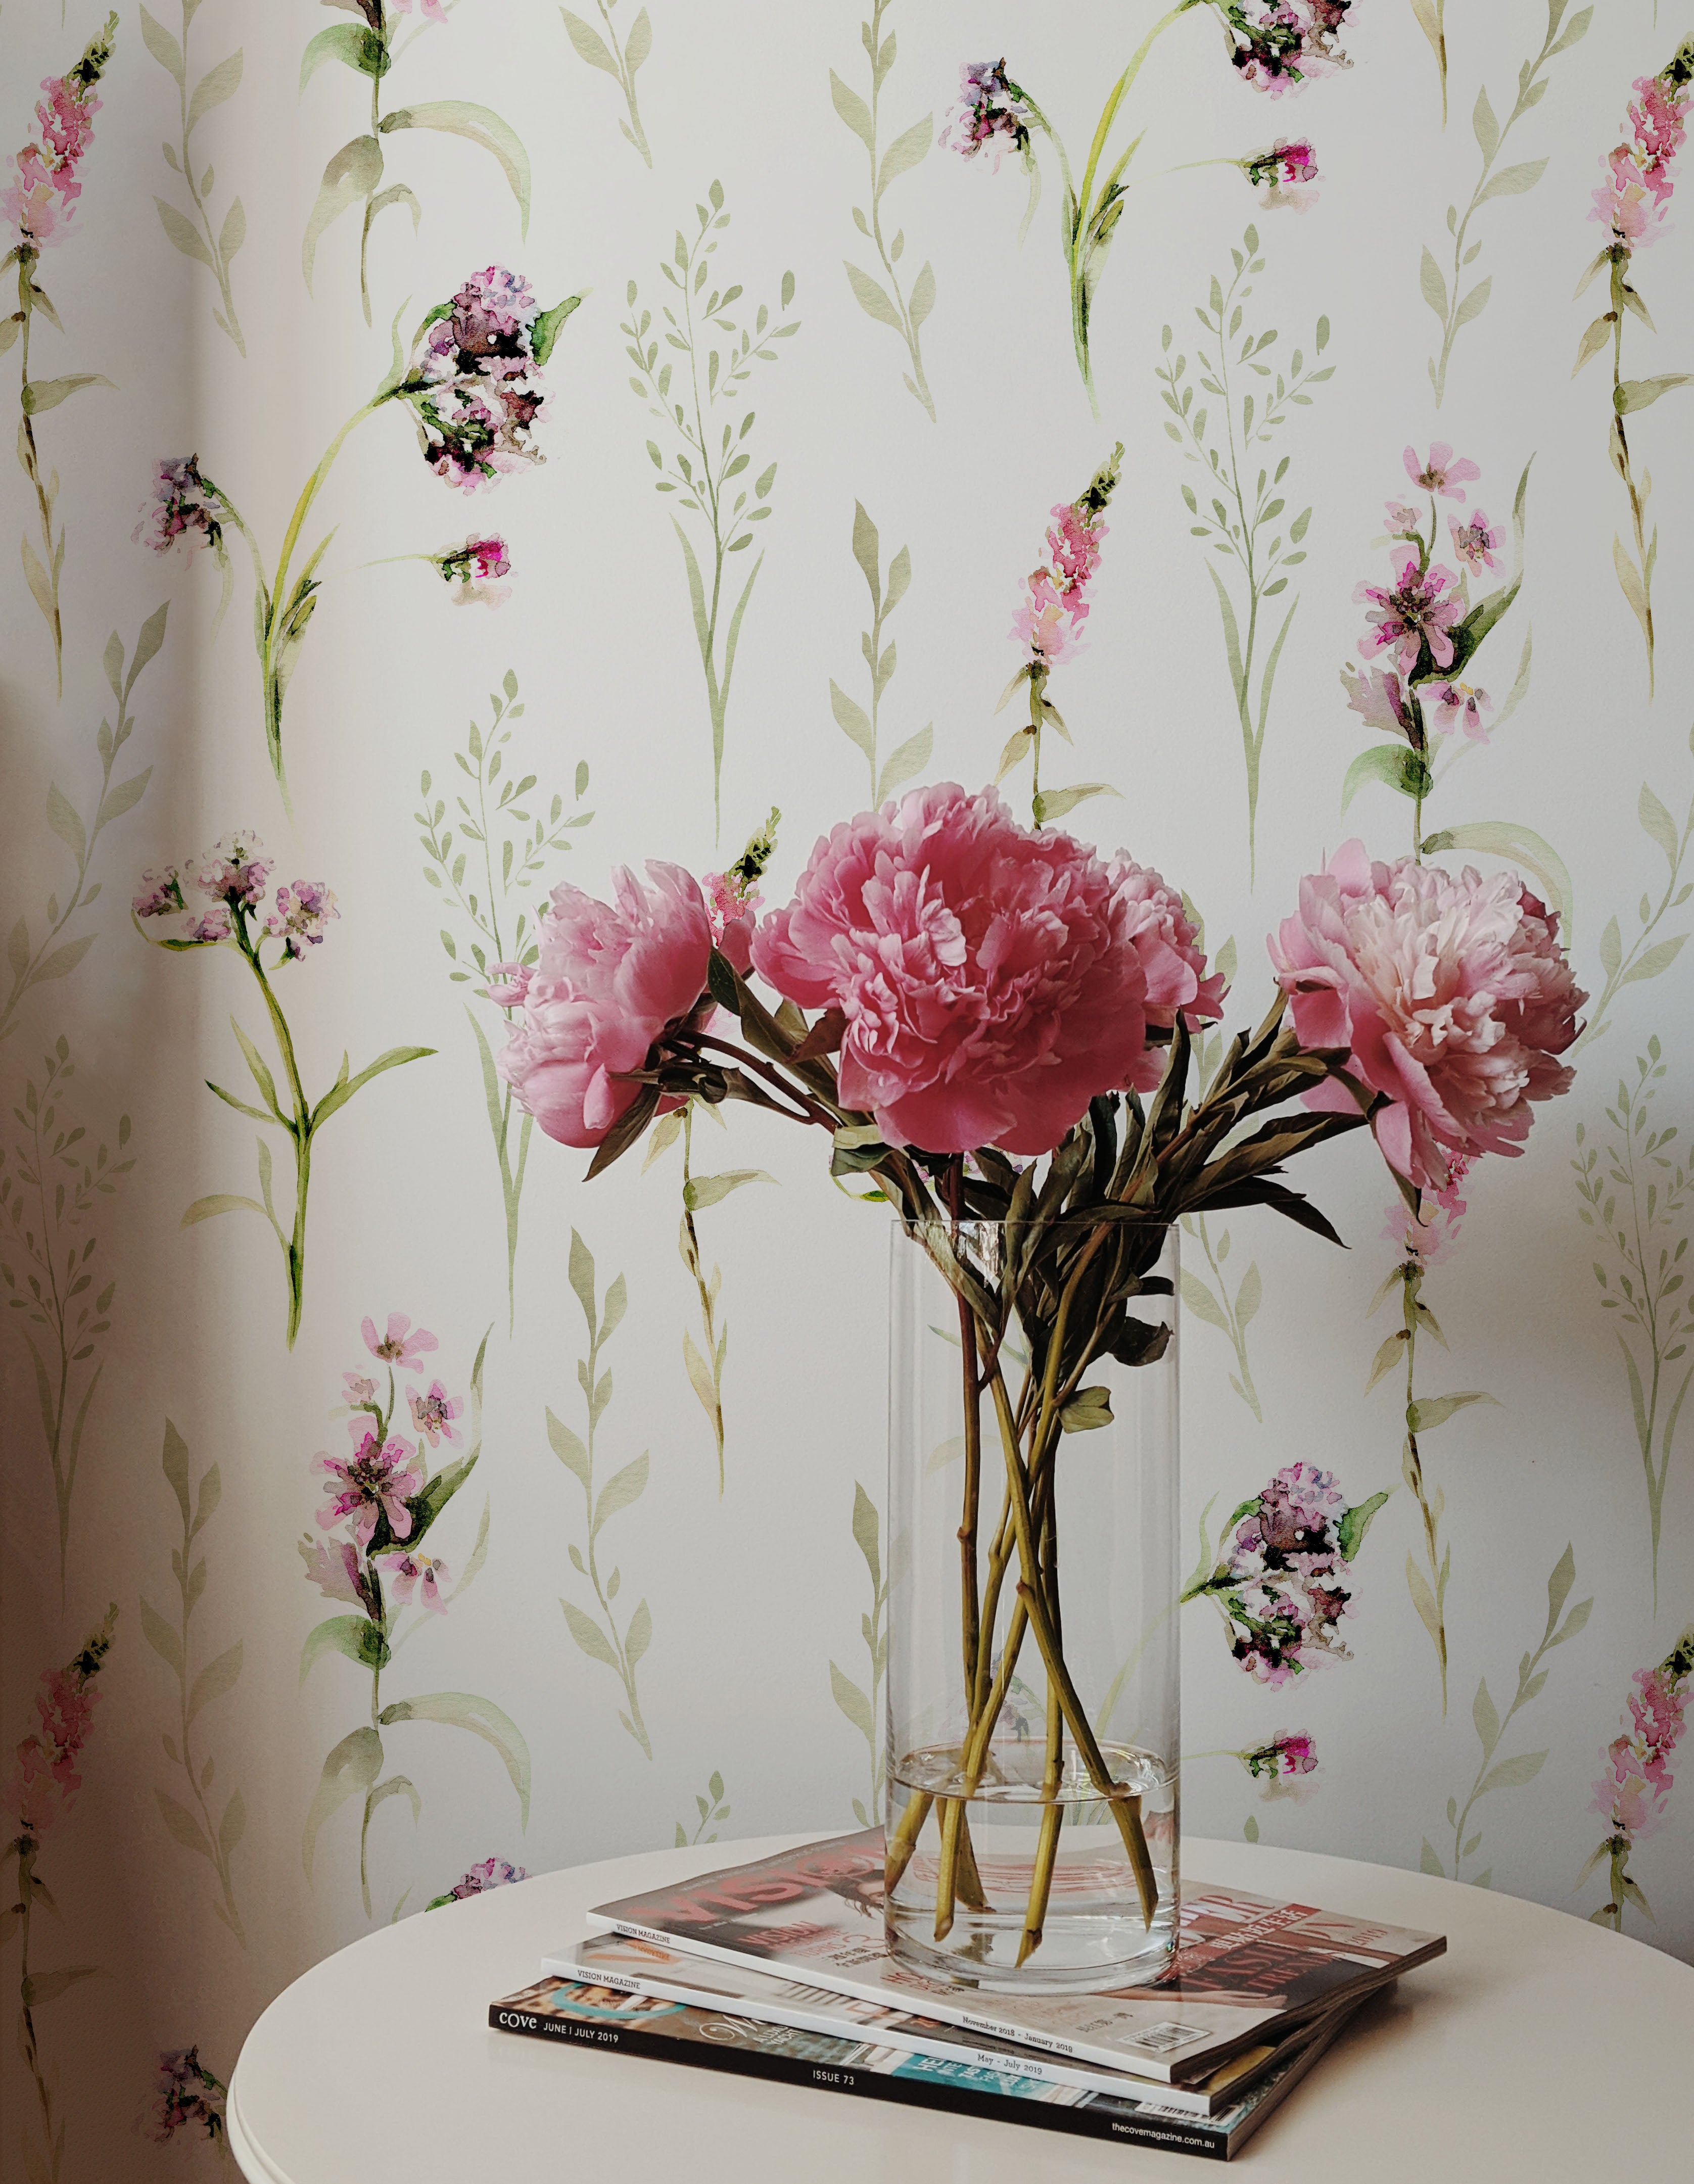 A corner of a room showing a portion of the 'Blooming Spring Wallpaper' with a small round table holding a clear glass vase of vibrant pink peonies. The floral arrangement complements the pastel pink flowers and green leaves on the wallpaper.